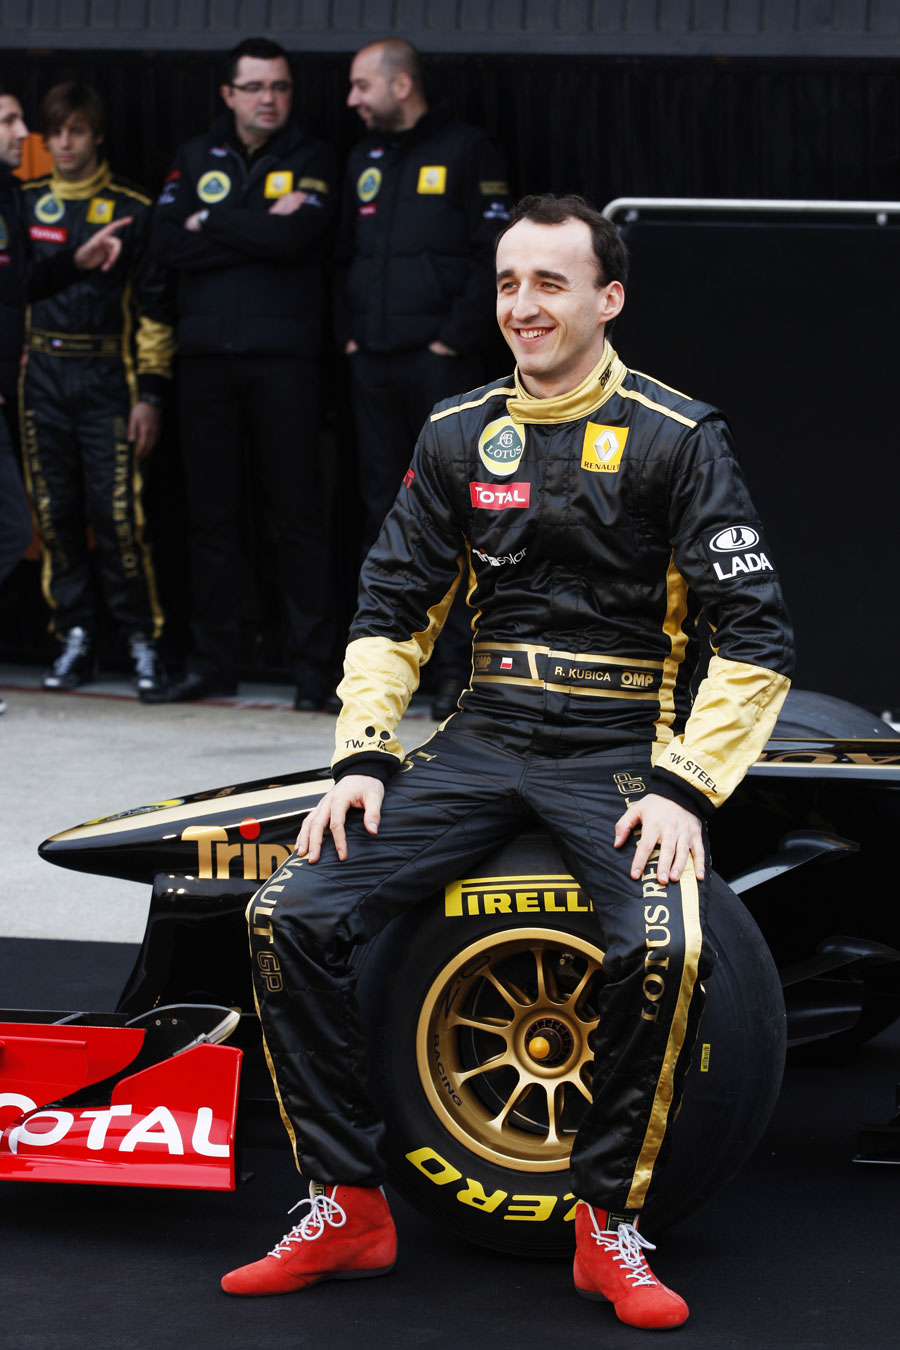 Robert Kubica at the launch of the Lotus Renault GP R31